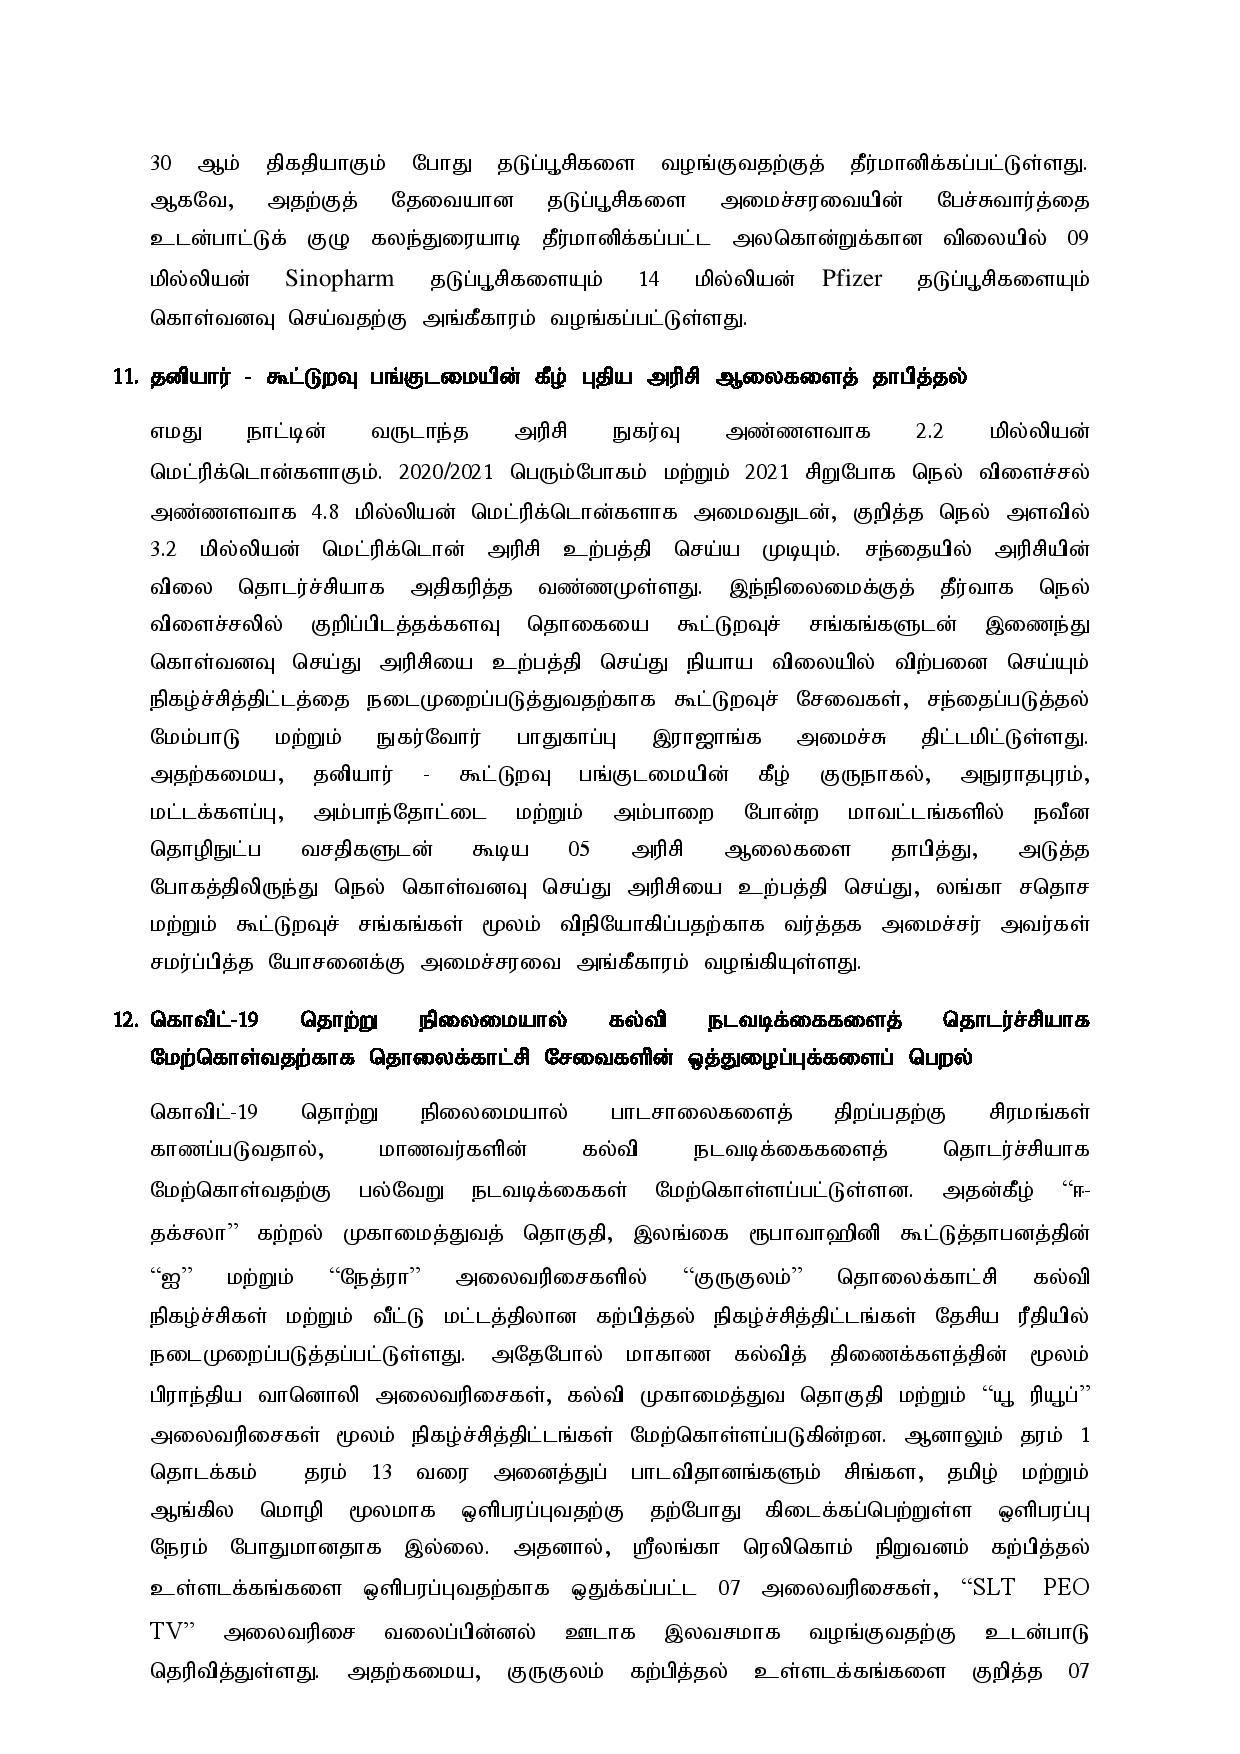 Cabinet Decision on 17.08.2021 Tamil page 005